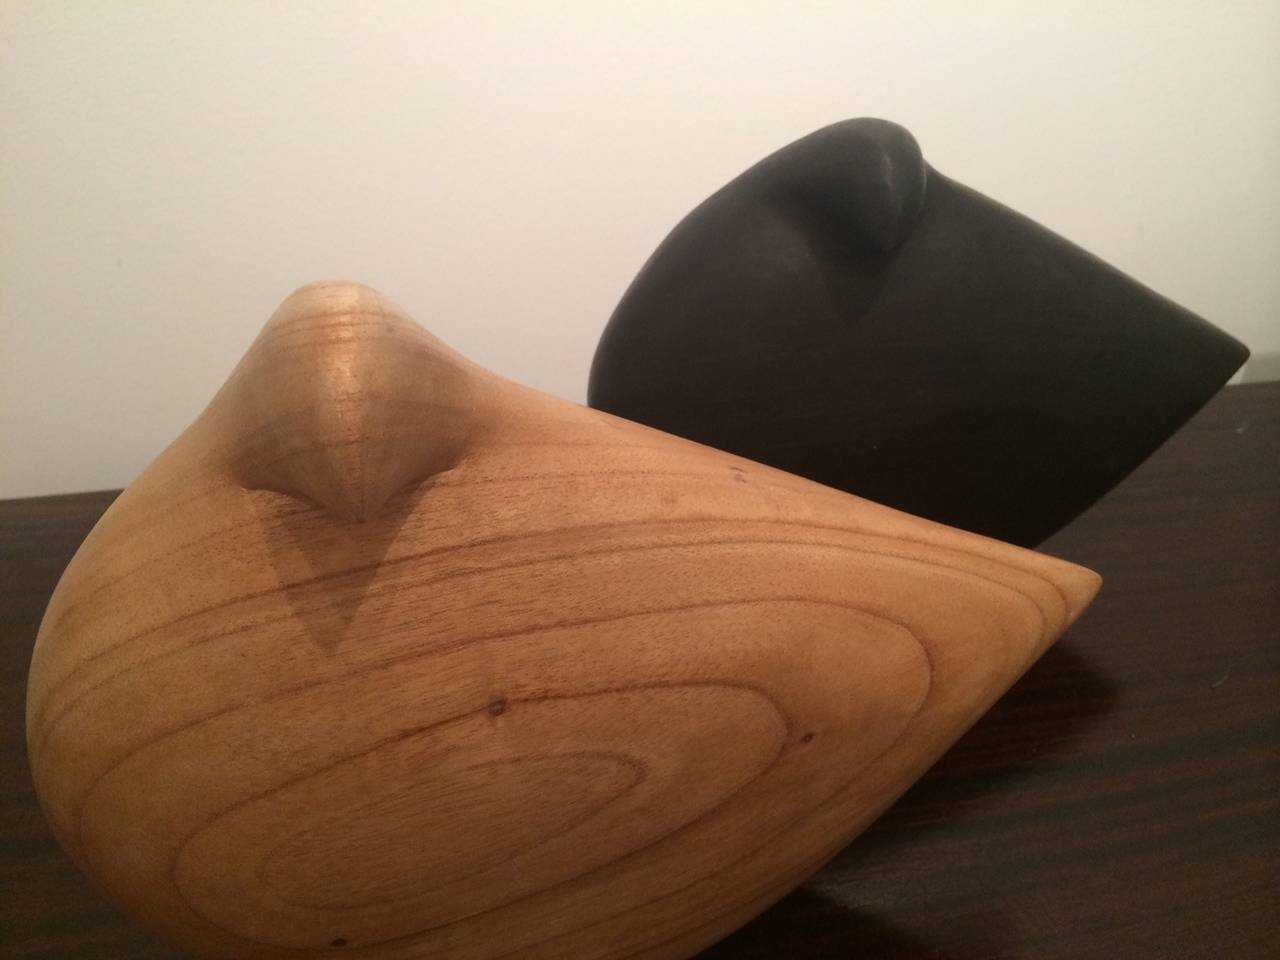 Sculptural wooden doves, symbols of peace. Because these are wood, the grain and pattern of the wood differs slightly from piece to piece.